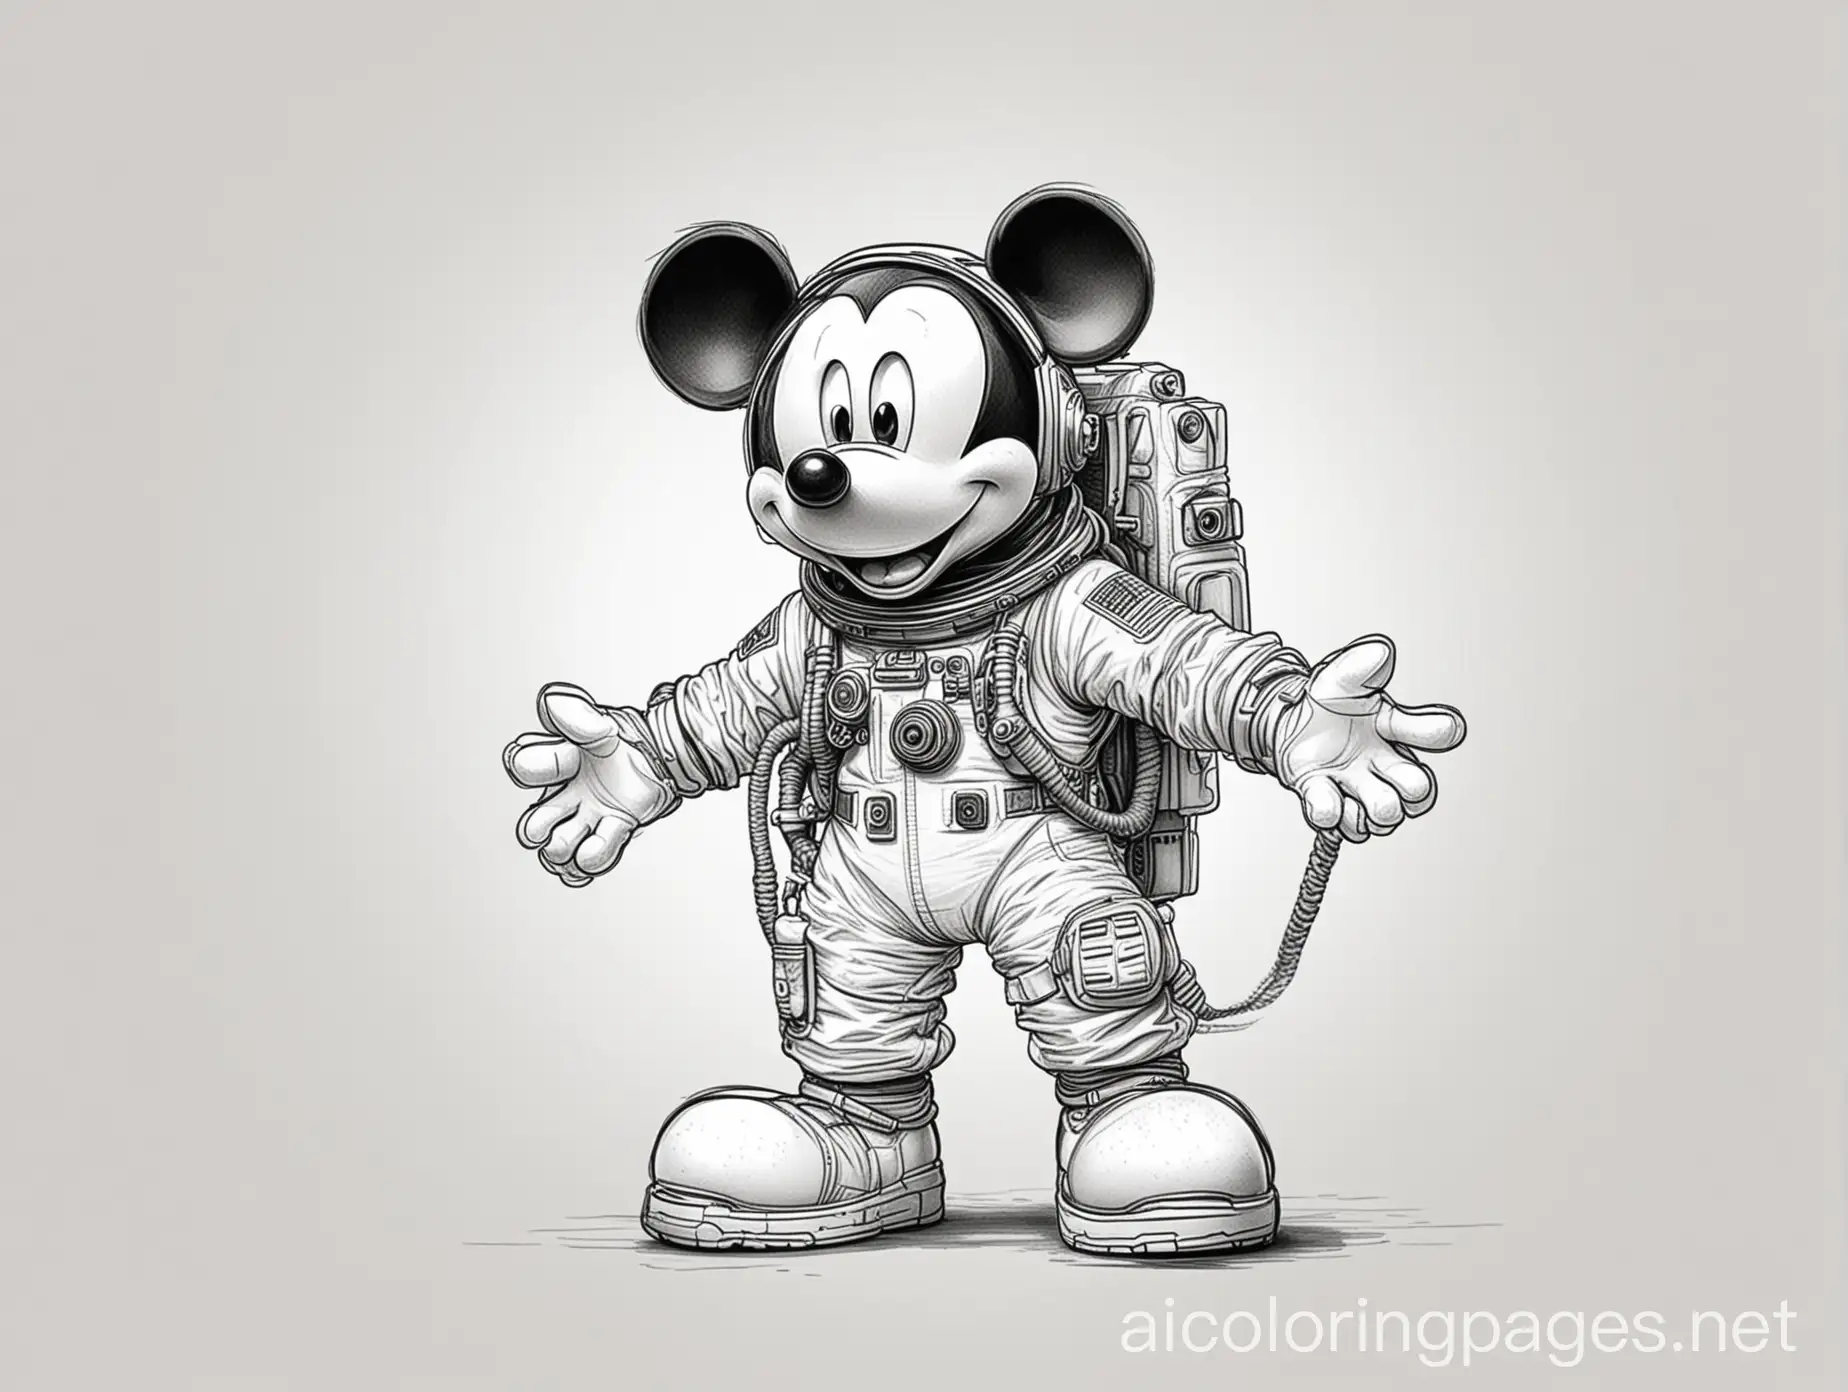 Astronaut-Mickey-Mouse-Coloring-Page-Black-and-White-Line-Art-on-White-Background